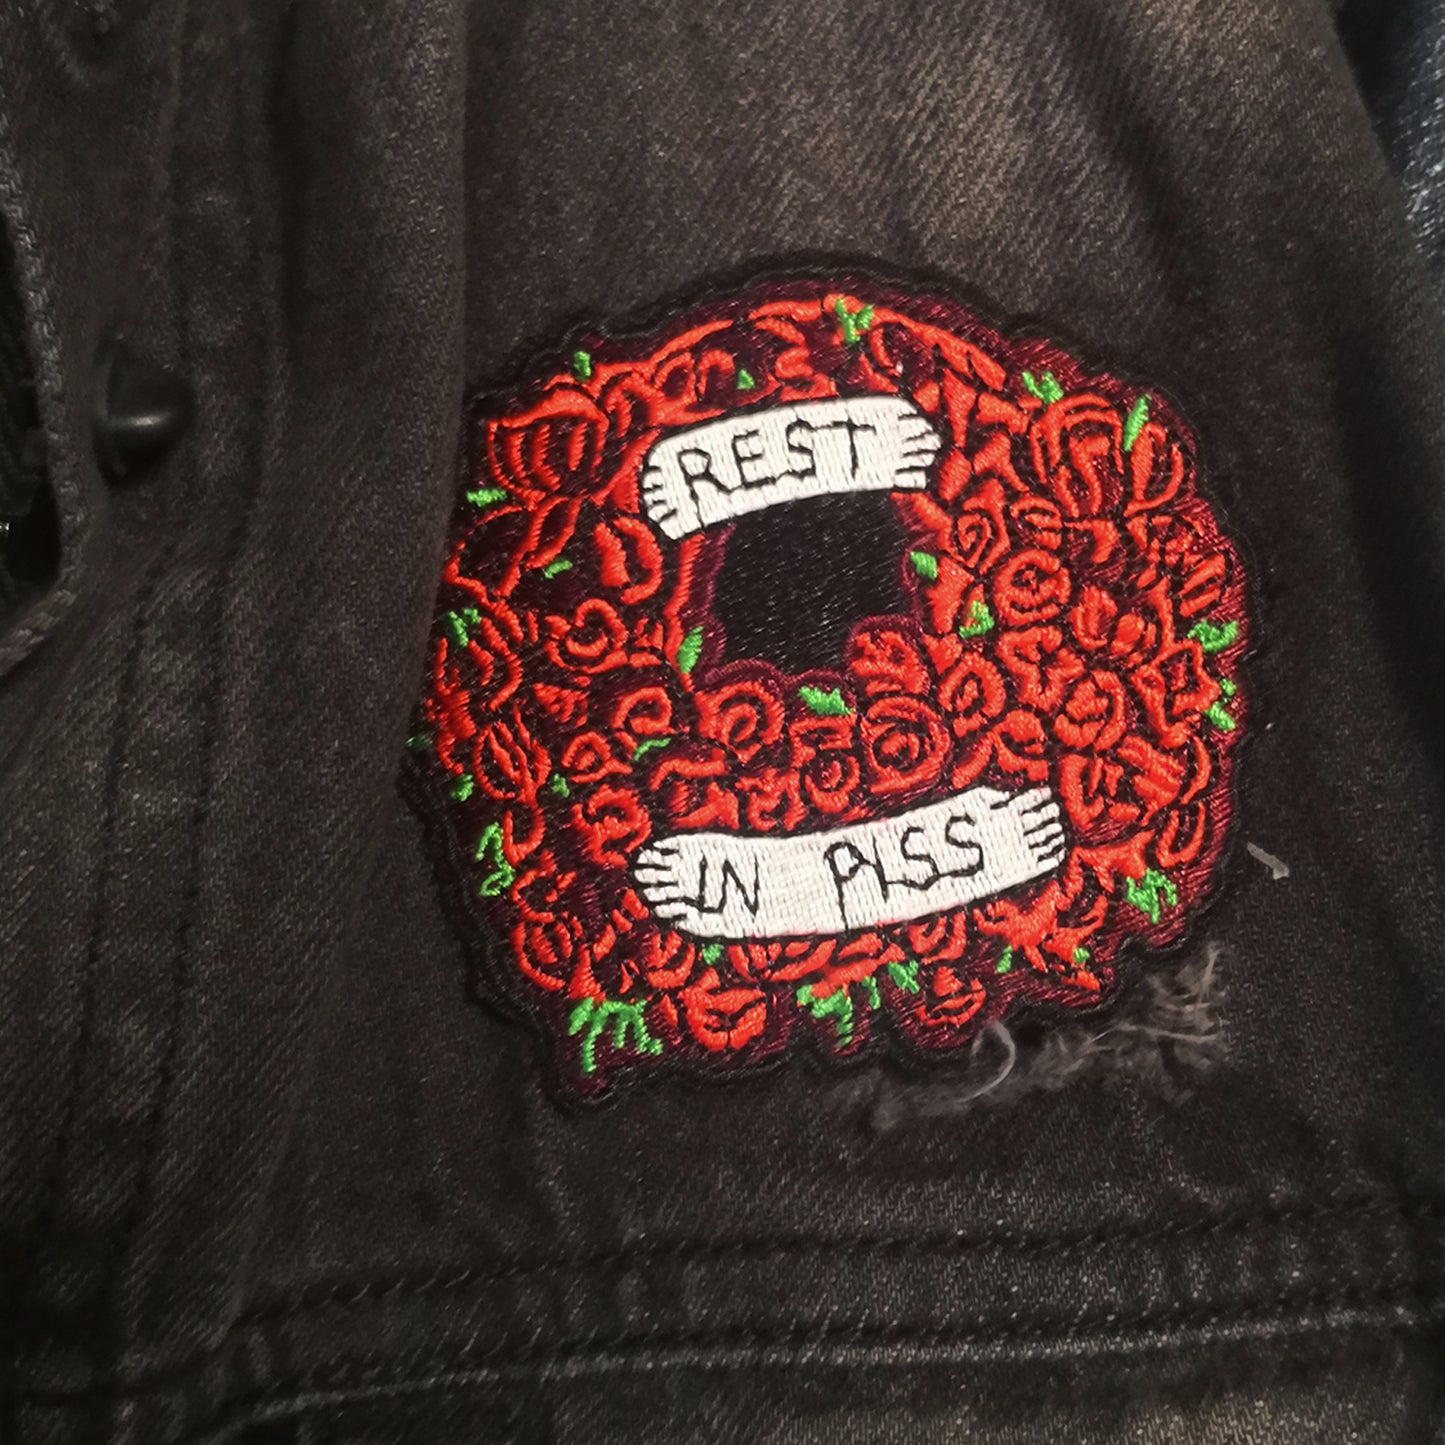 Rest In Piss patch